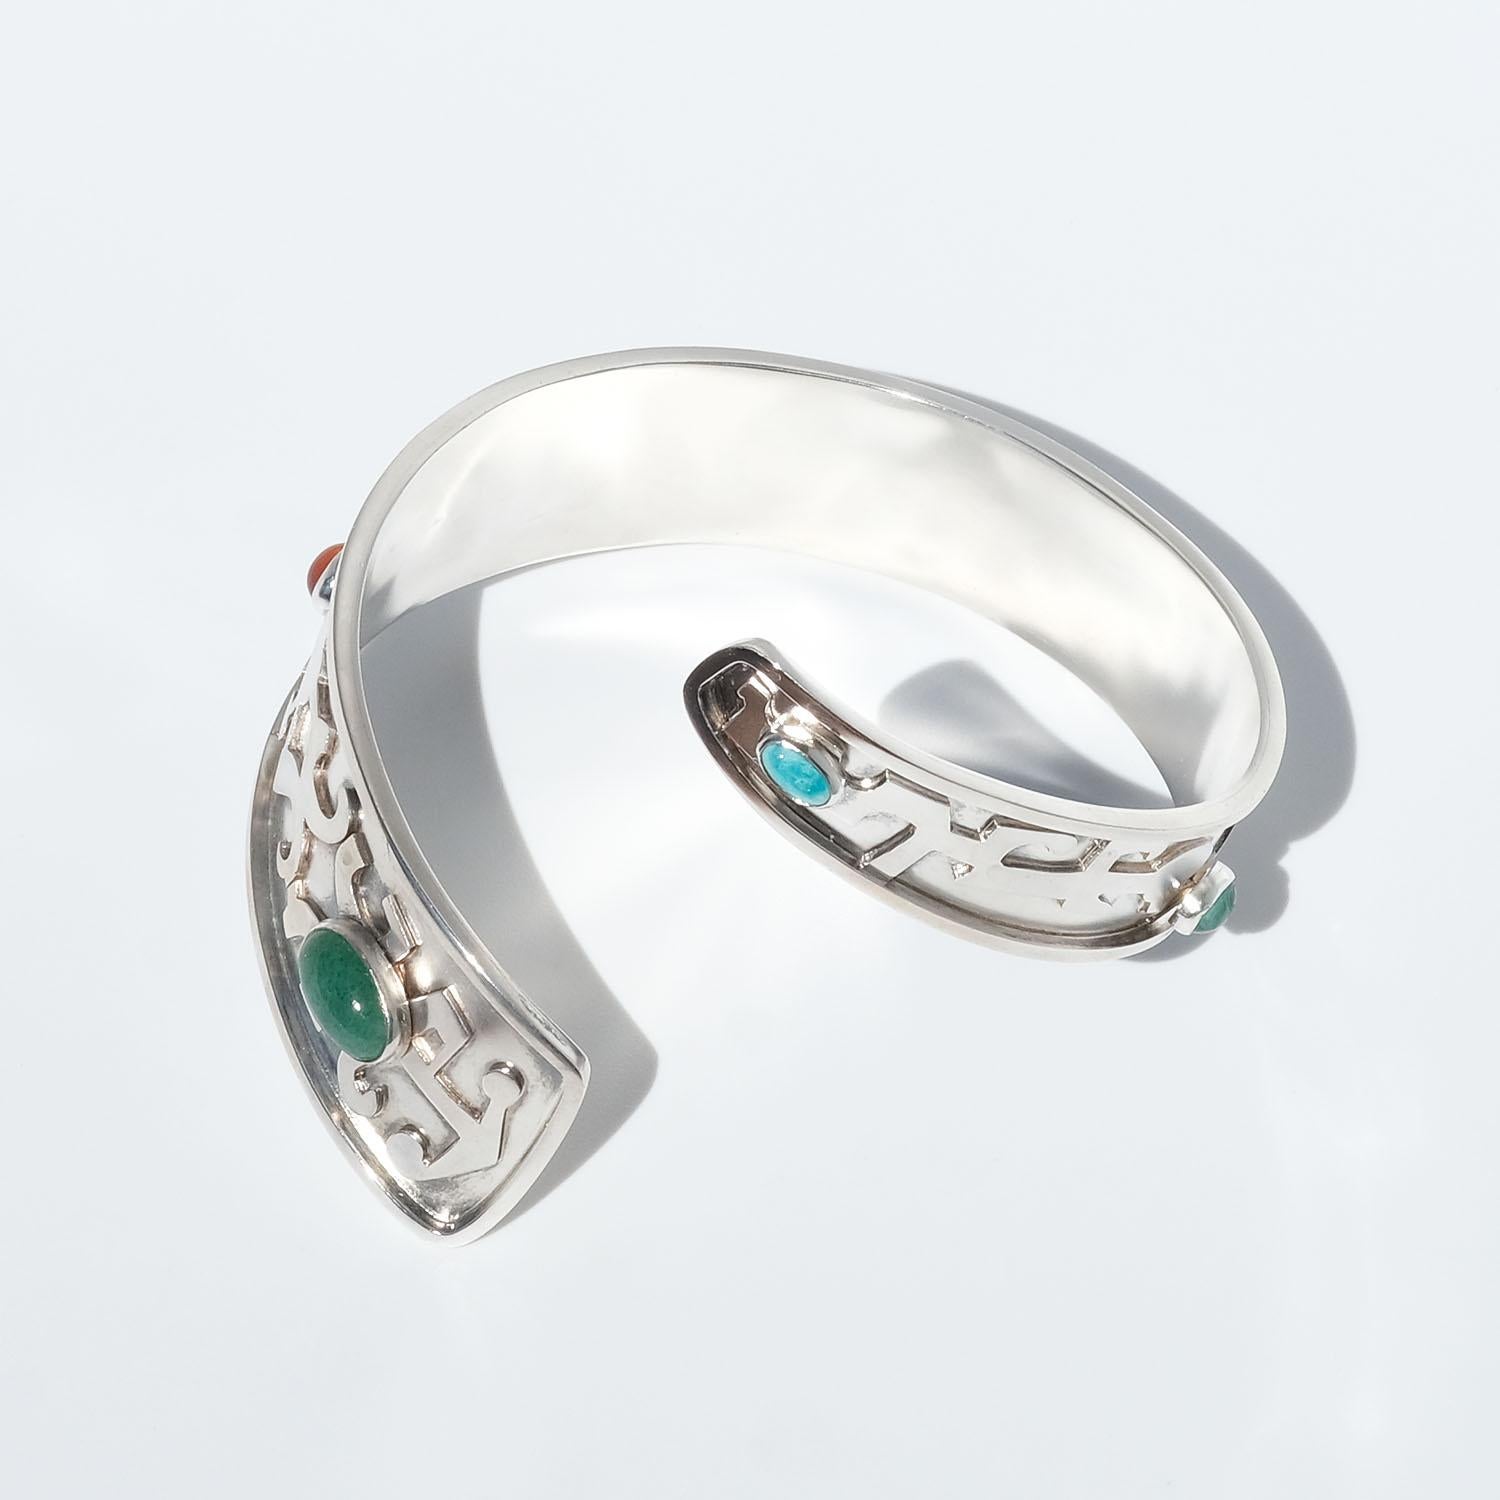 This silver armlet is decorated with something that resembles the ancient Egyptian sacred written symbols hieroglyphics and different stones such as, an aventurine quartz, a carnelian, a tiger eye stone, a malachite and a turquoise.

The design of